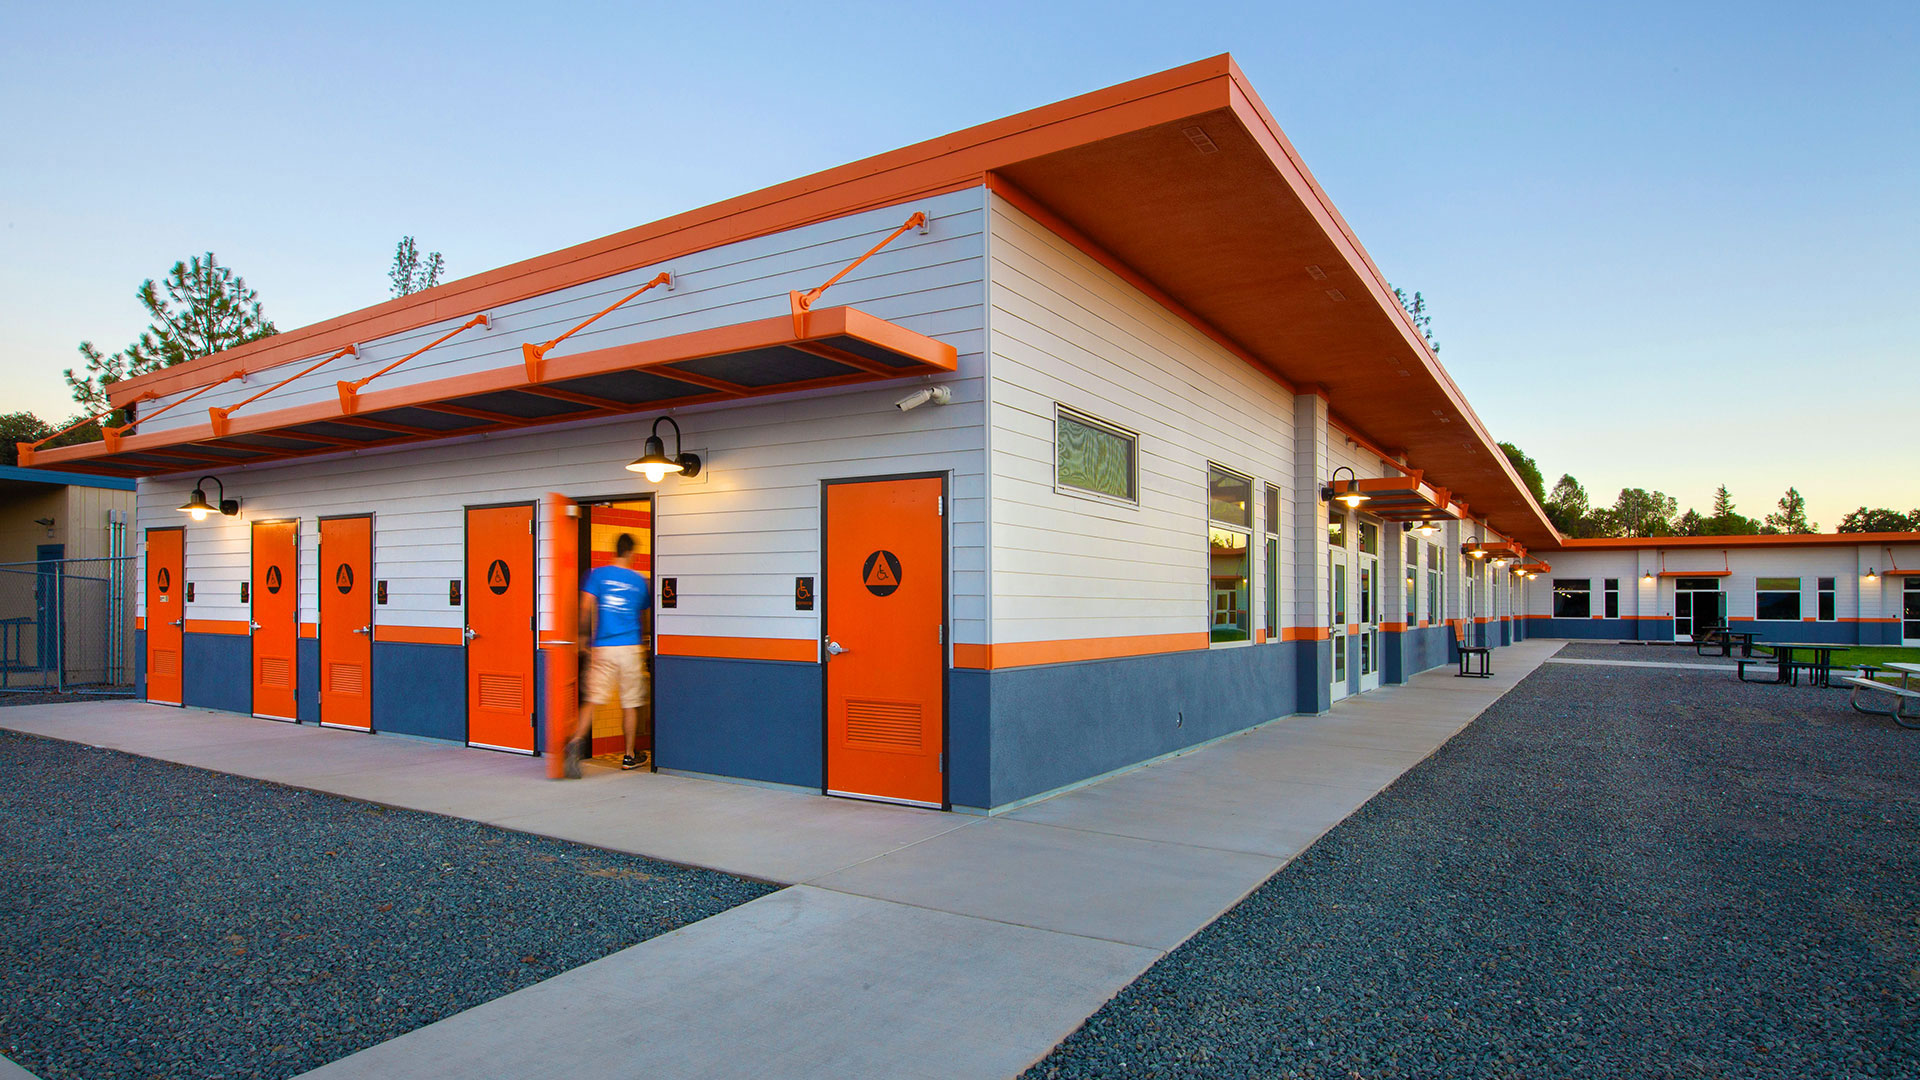 New modular restrooms, with orange doors and awning, on side of classrooms wing.